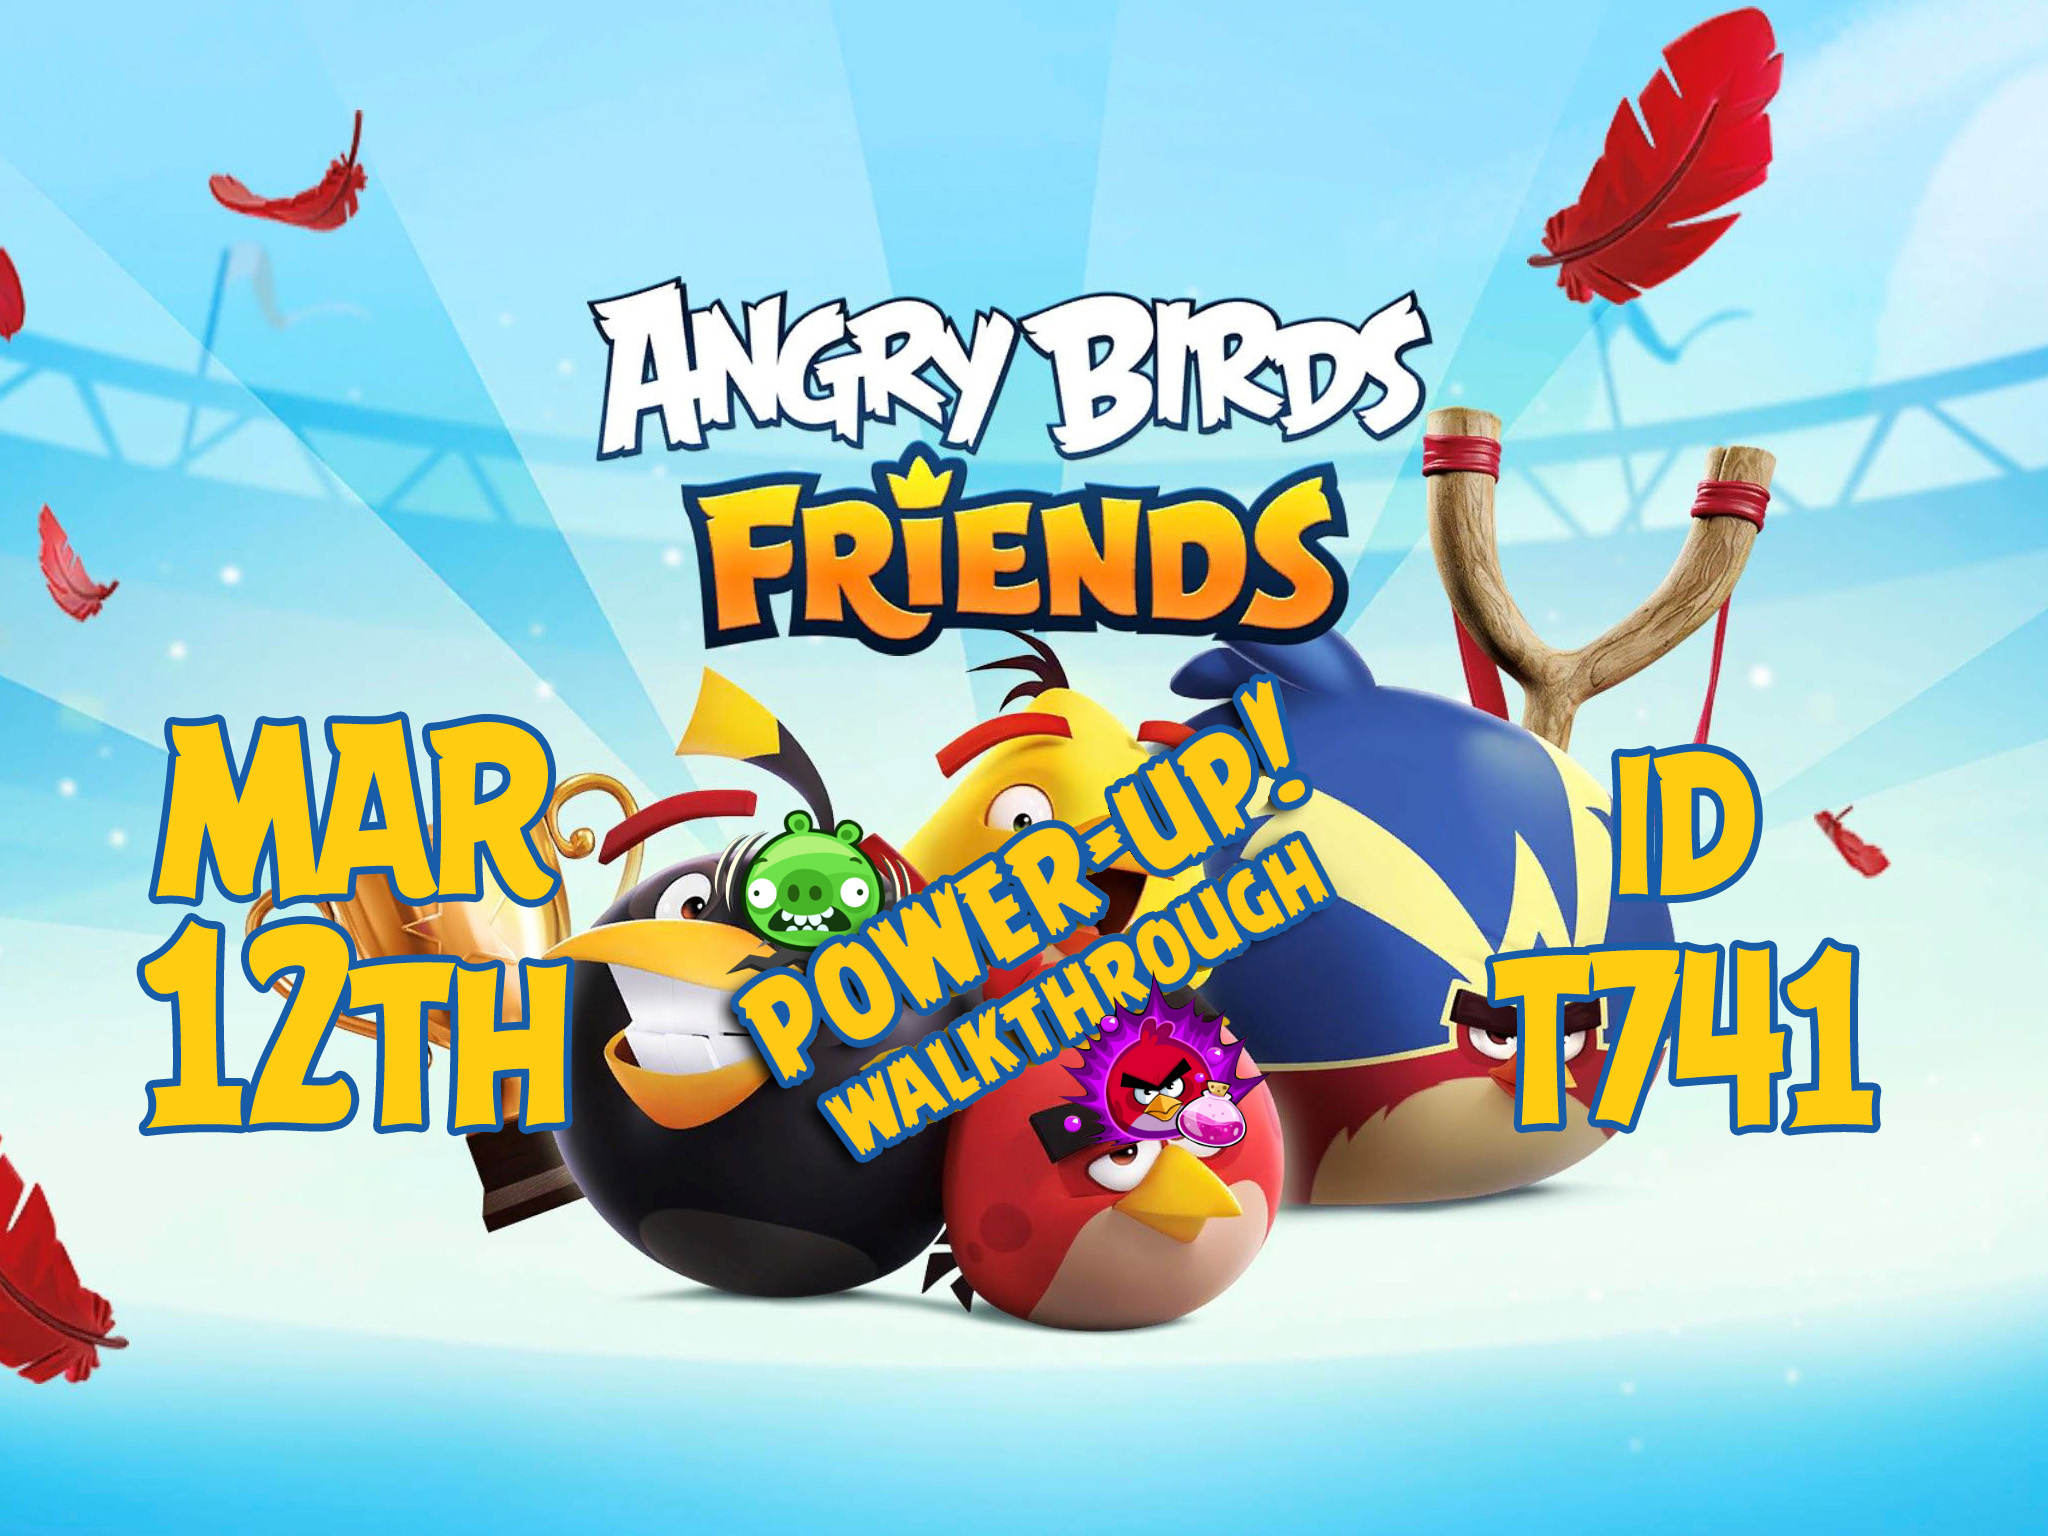 Angry-Birds-Friends-Tournament-T741-Feature-Image-PU